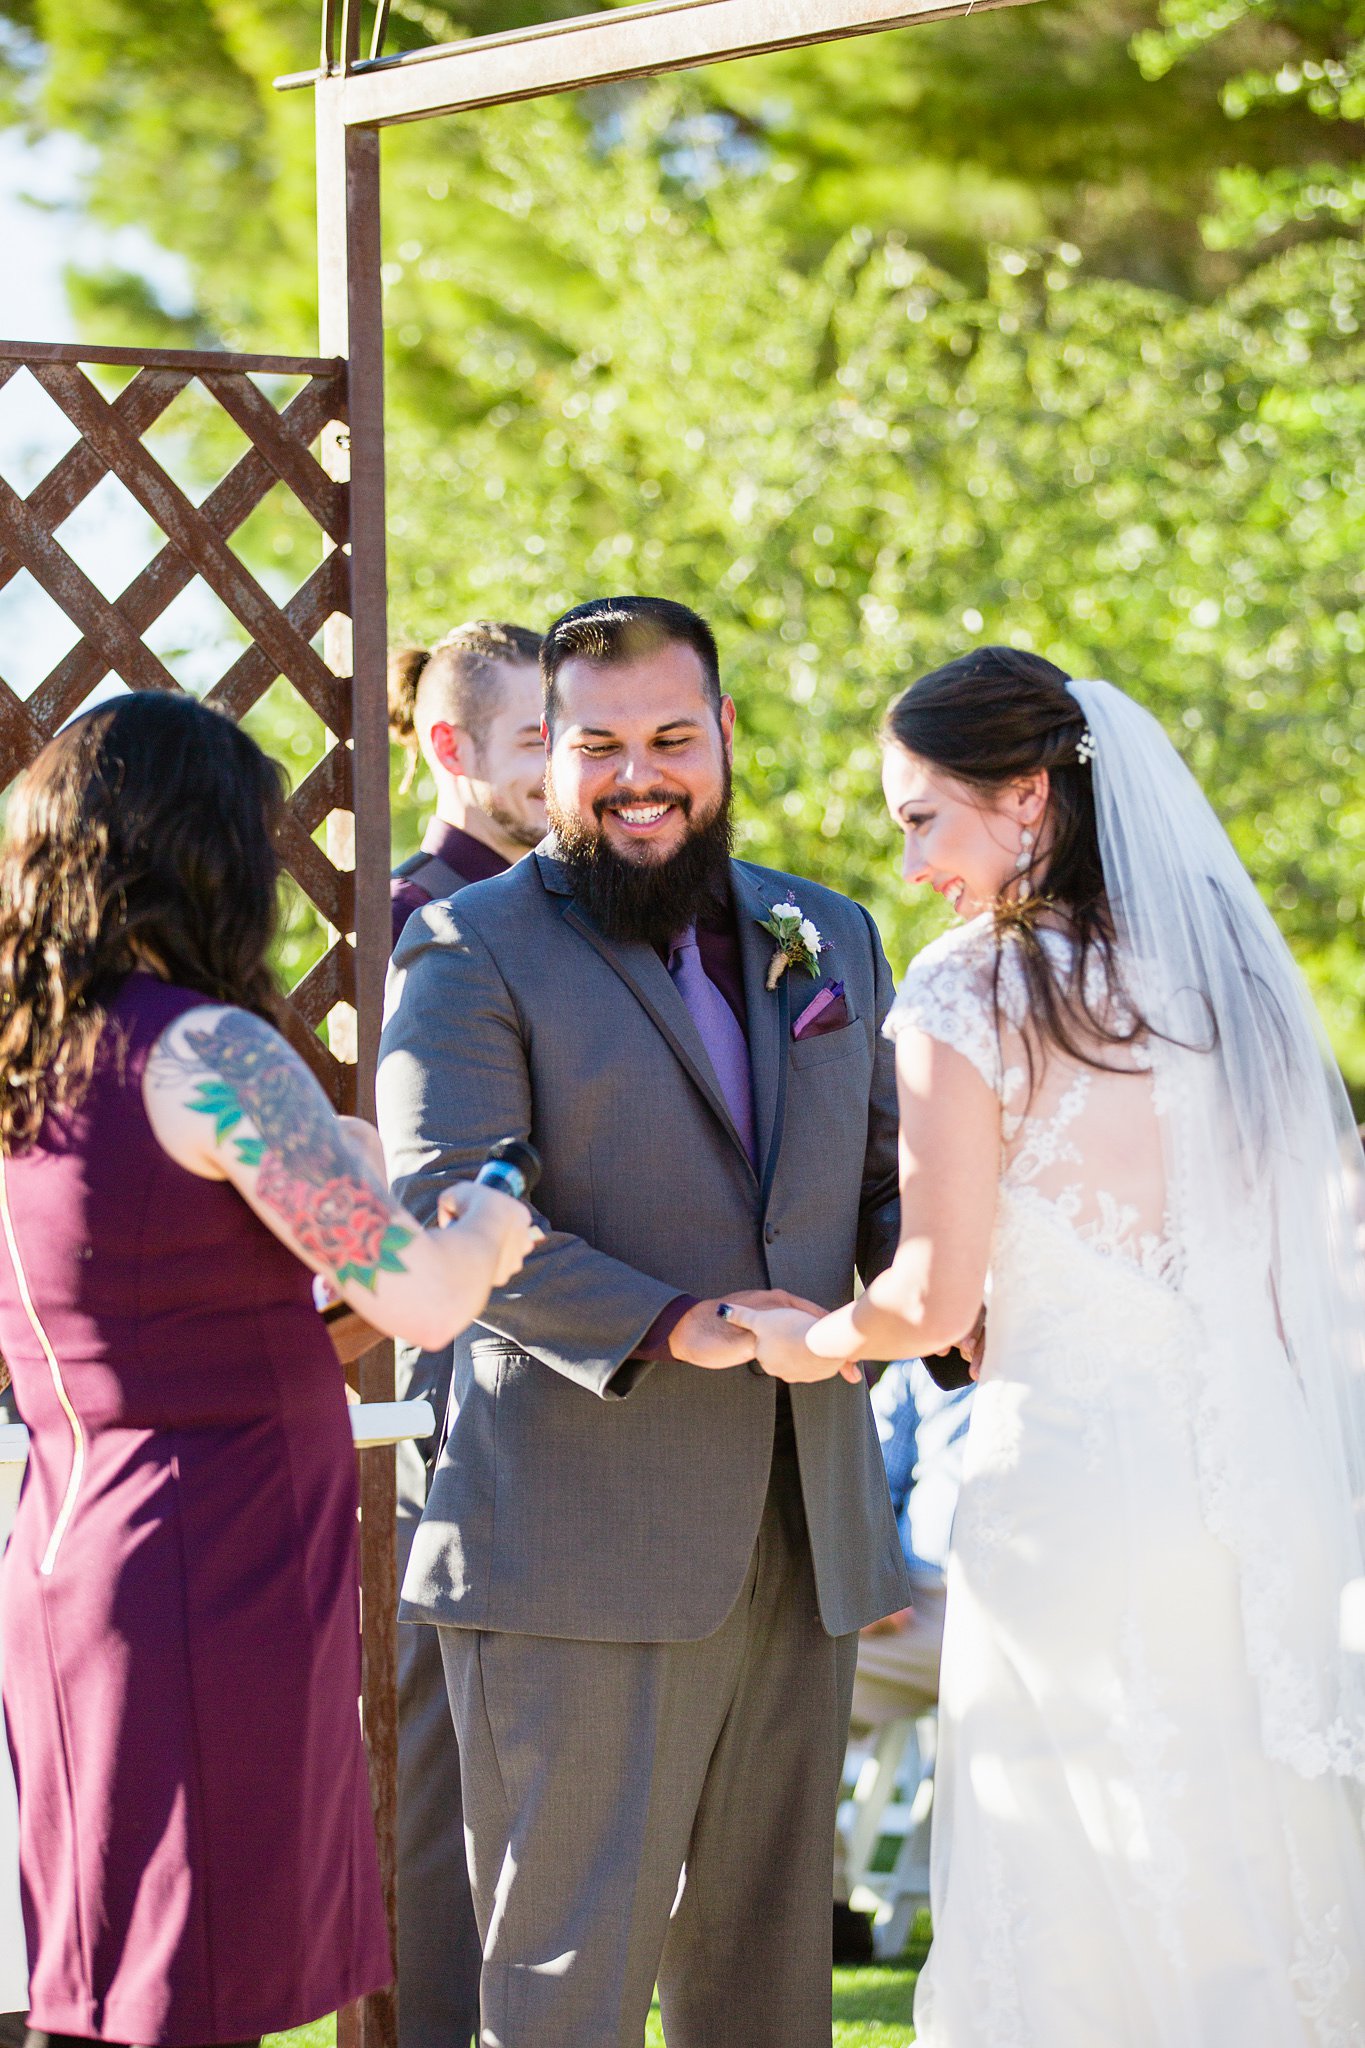 Bride and groom sharing a laugh during their wedding ceremony at the Schnepf Farm's Farmhouse by Arizona wedding photographer PMA Photography.